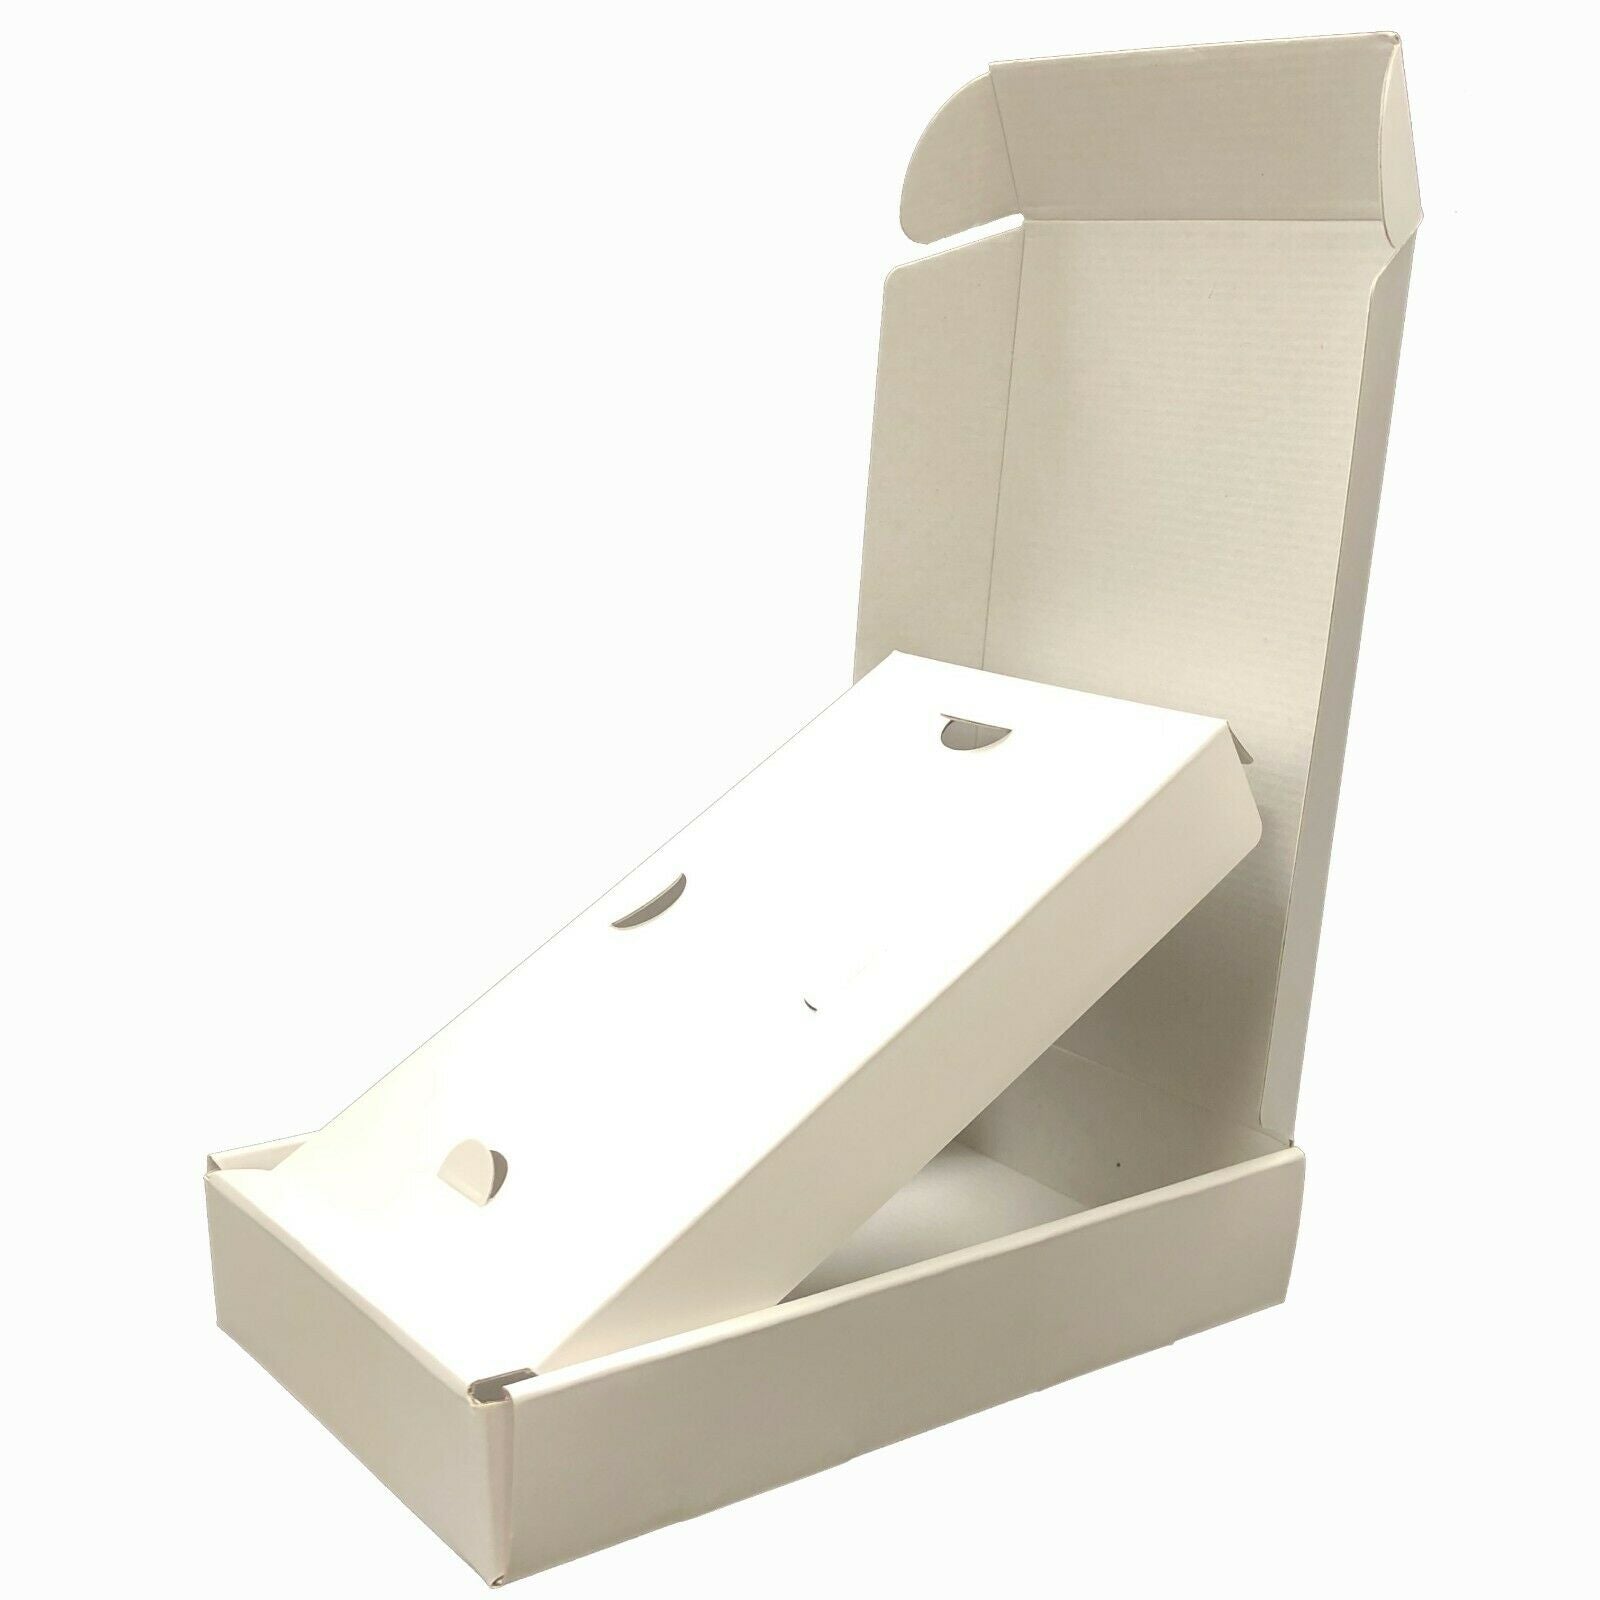 200 pcs Specialty Cell Phone Empty Boxes White Generic for Retail or Resale